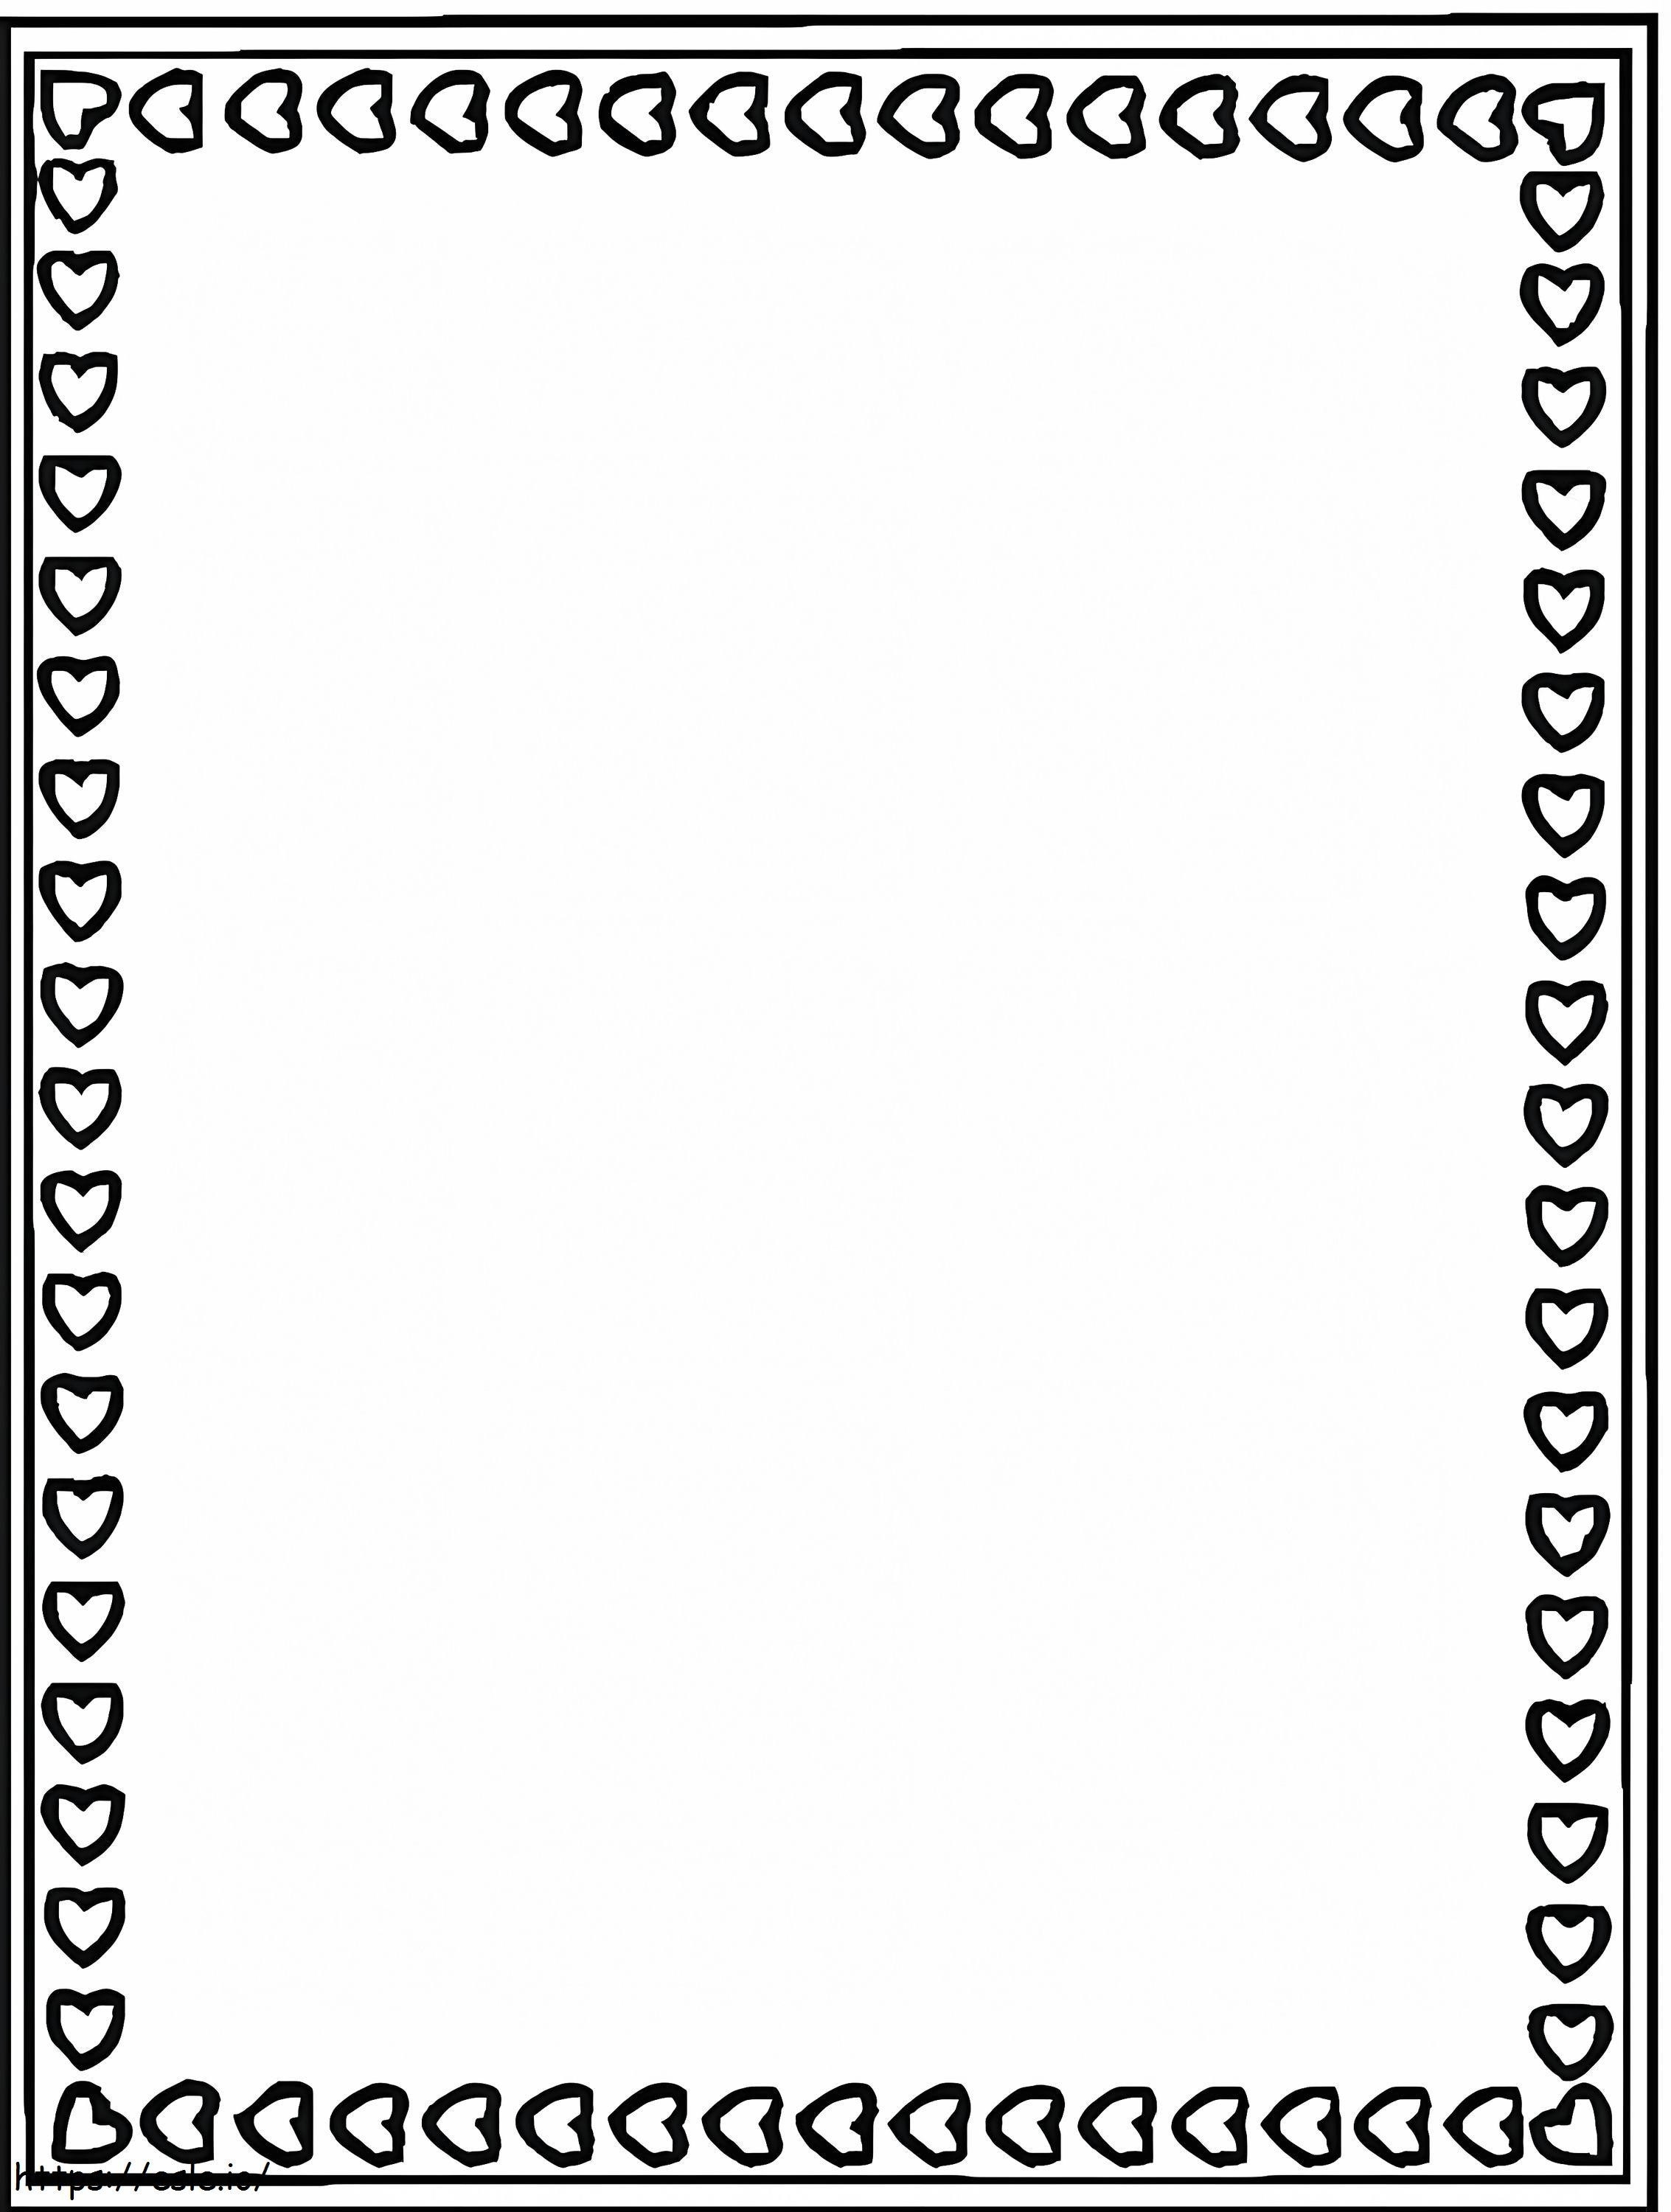 Easy Valentines Day Card coloring page